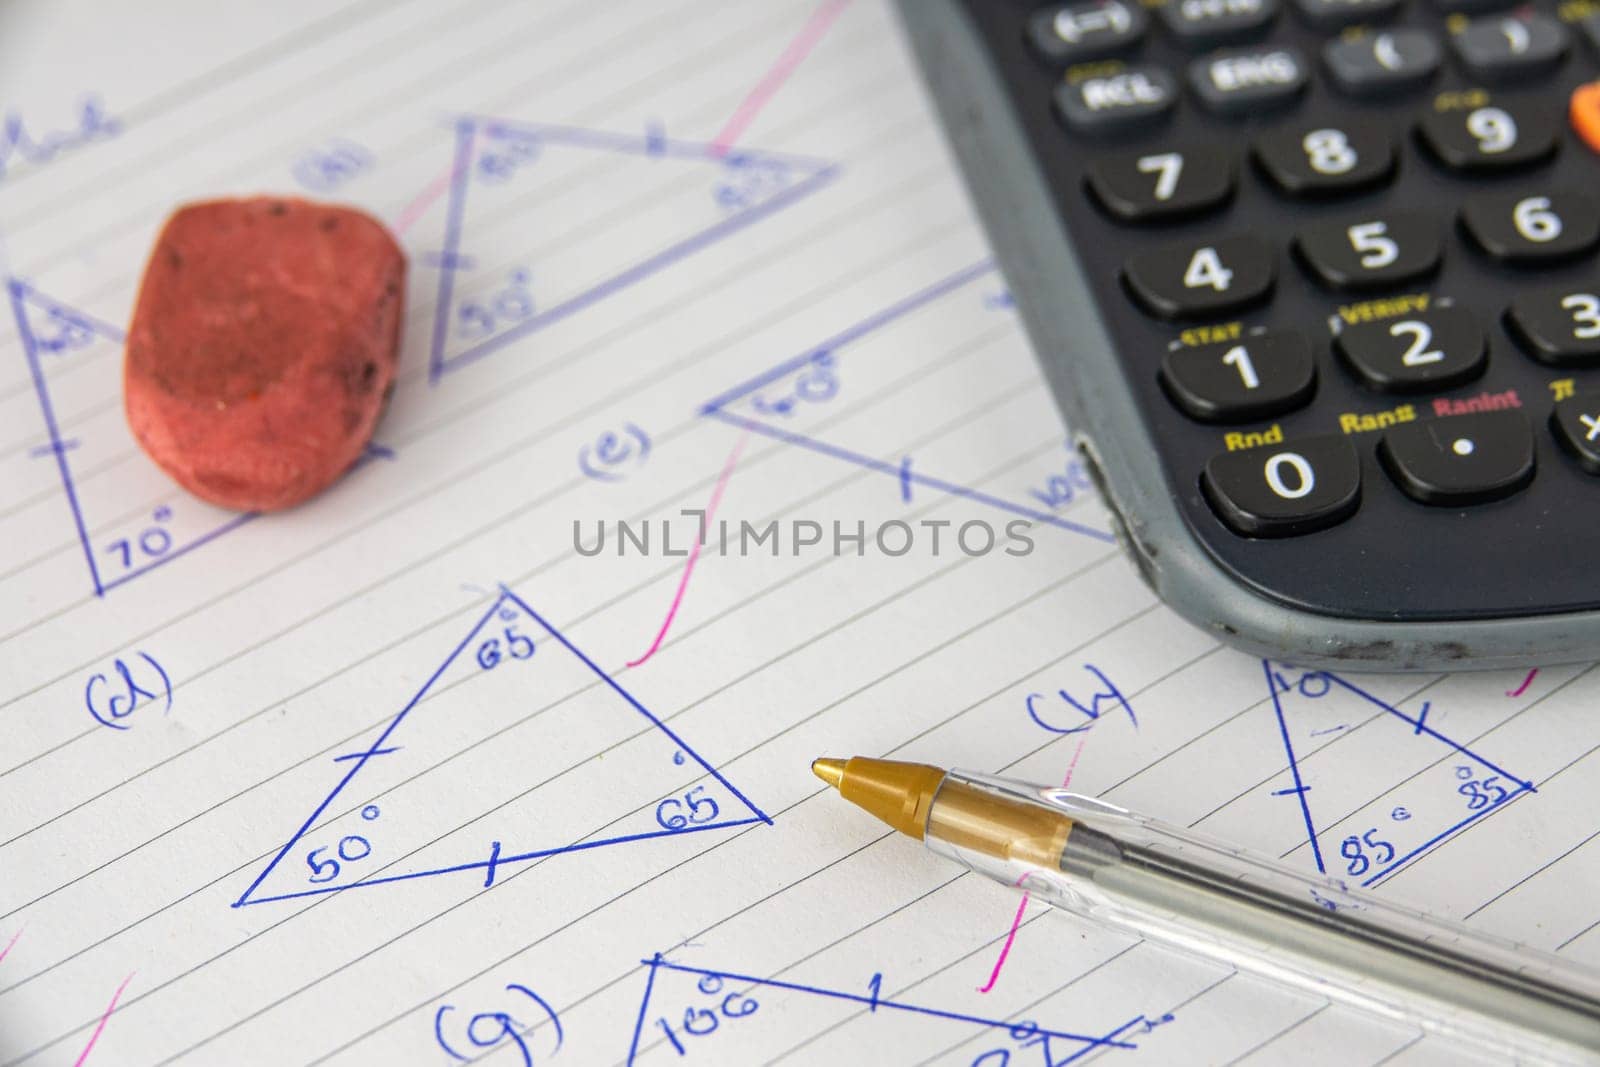 A Child's Math (Geometry) Homework Or Exam, With Calculator, Pen And Eraser